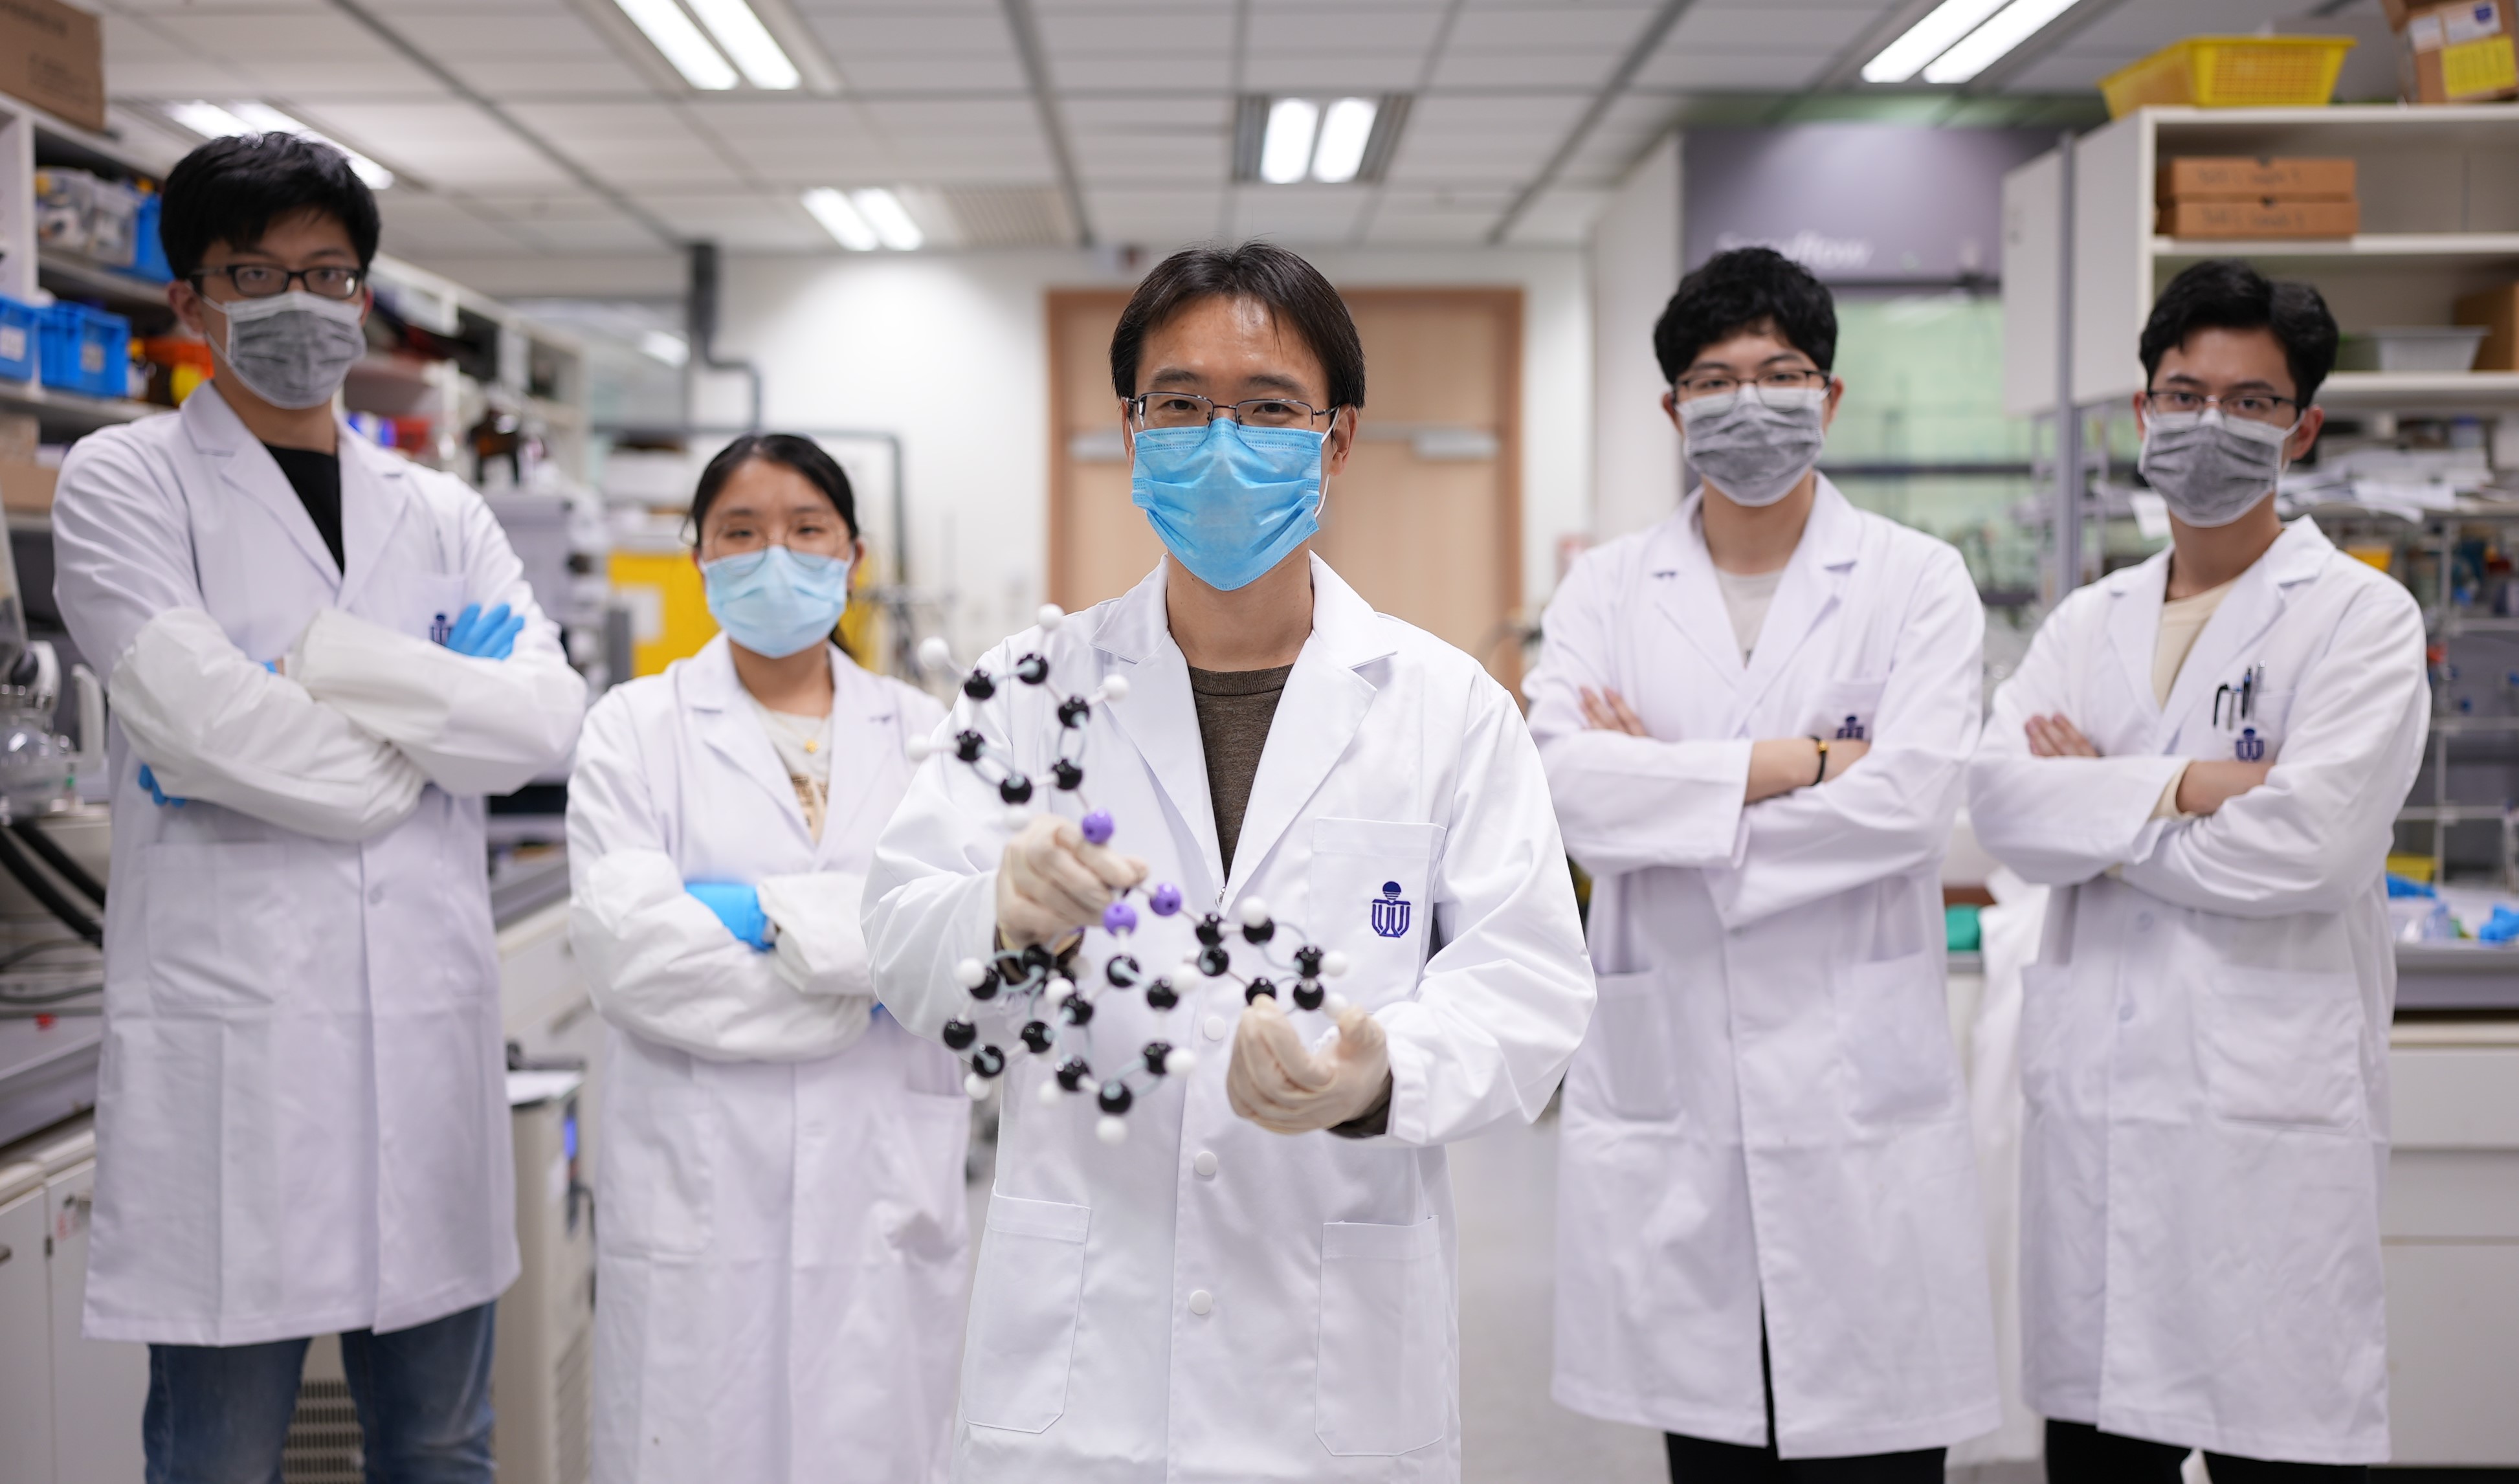 Prof. Sun (middle) and his research team